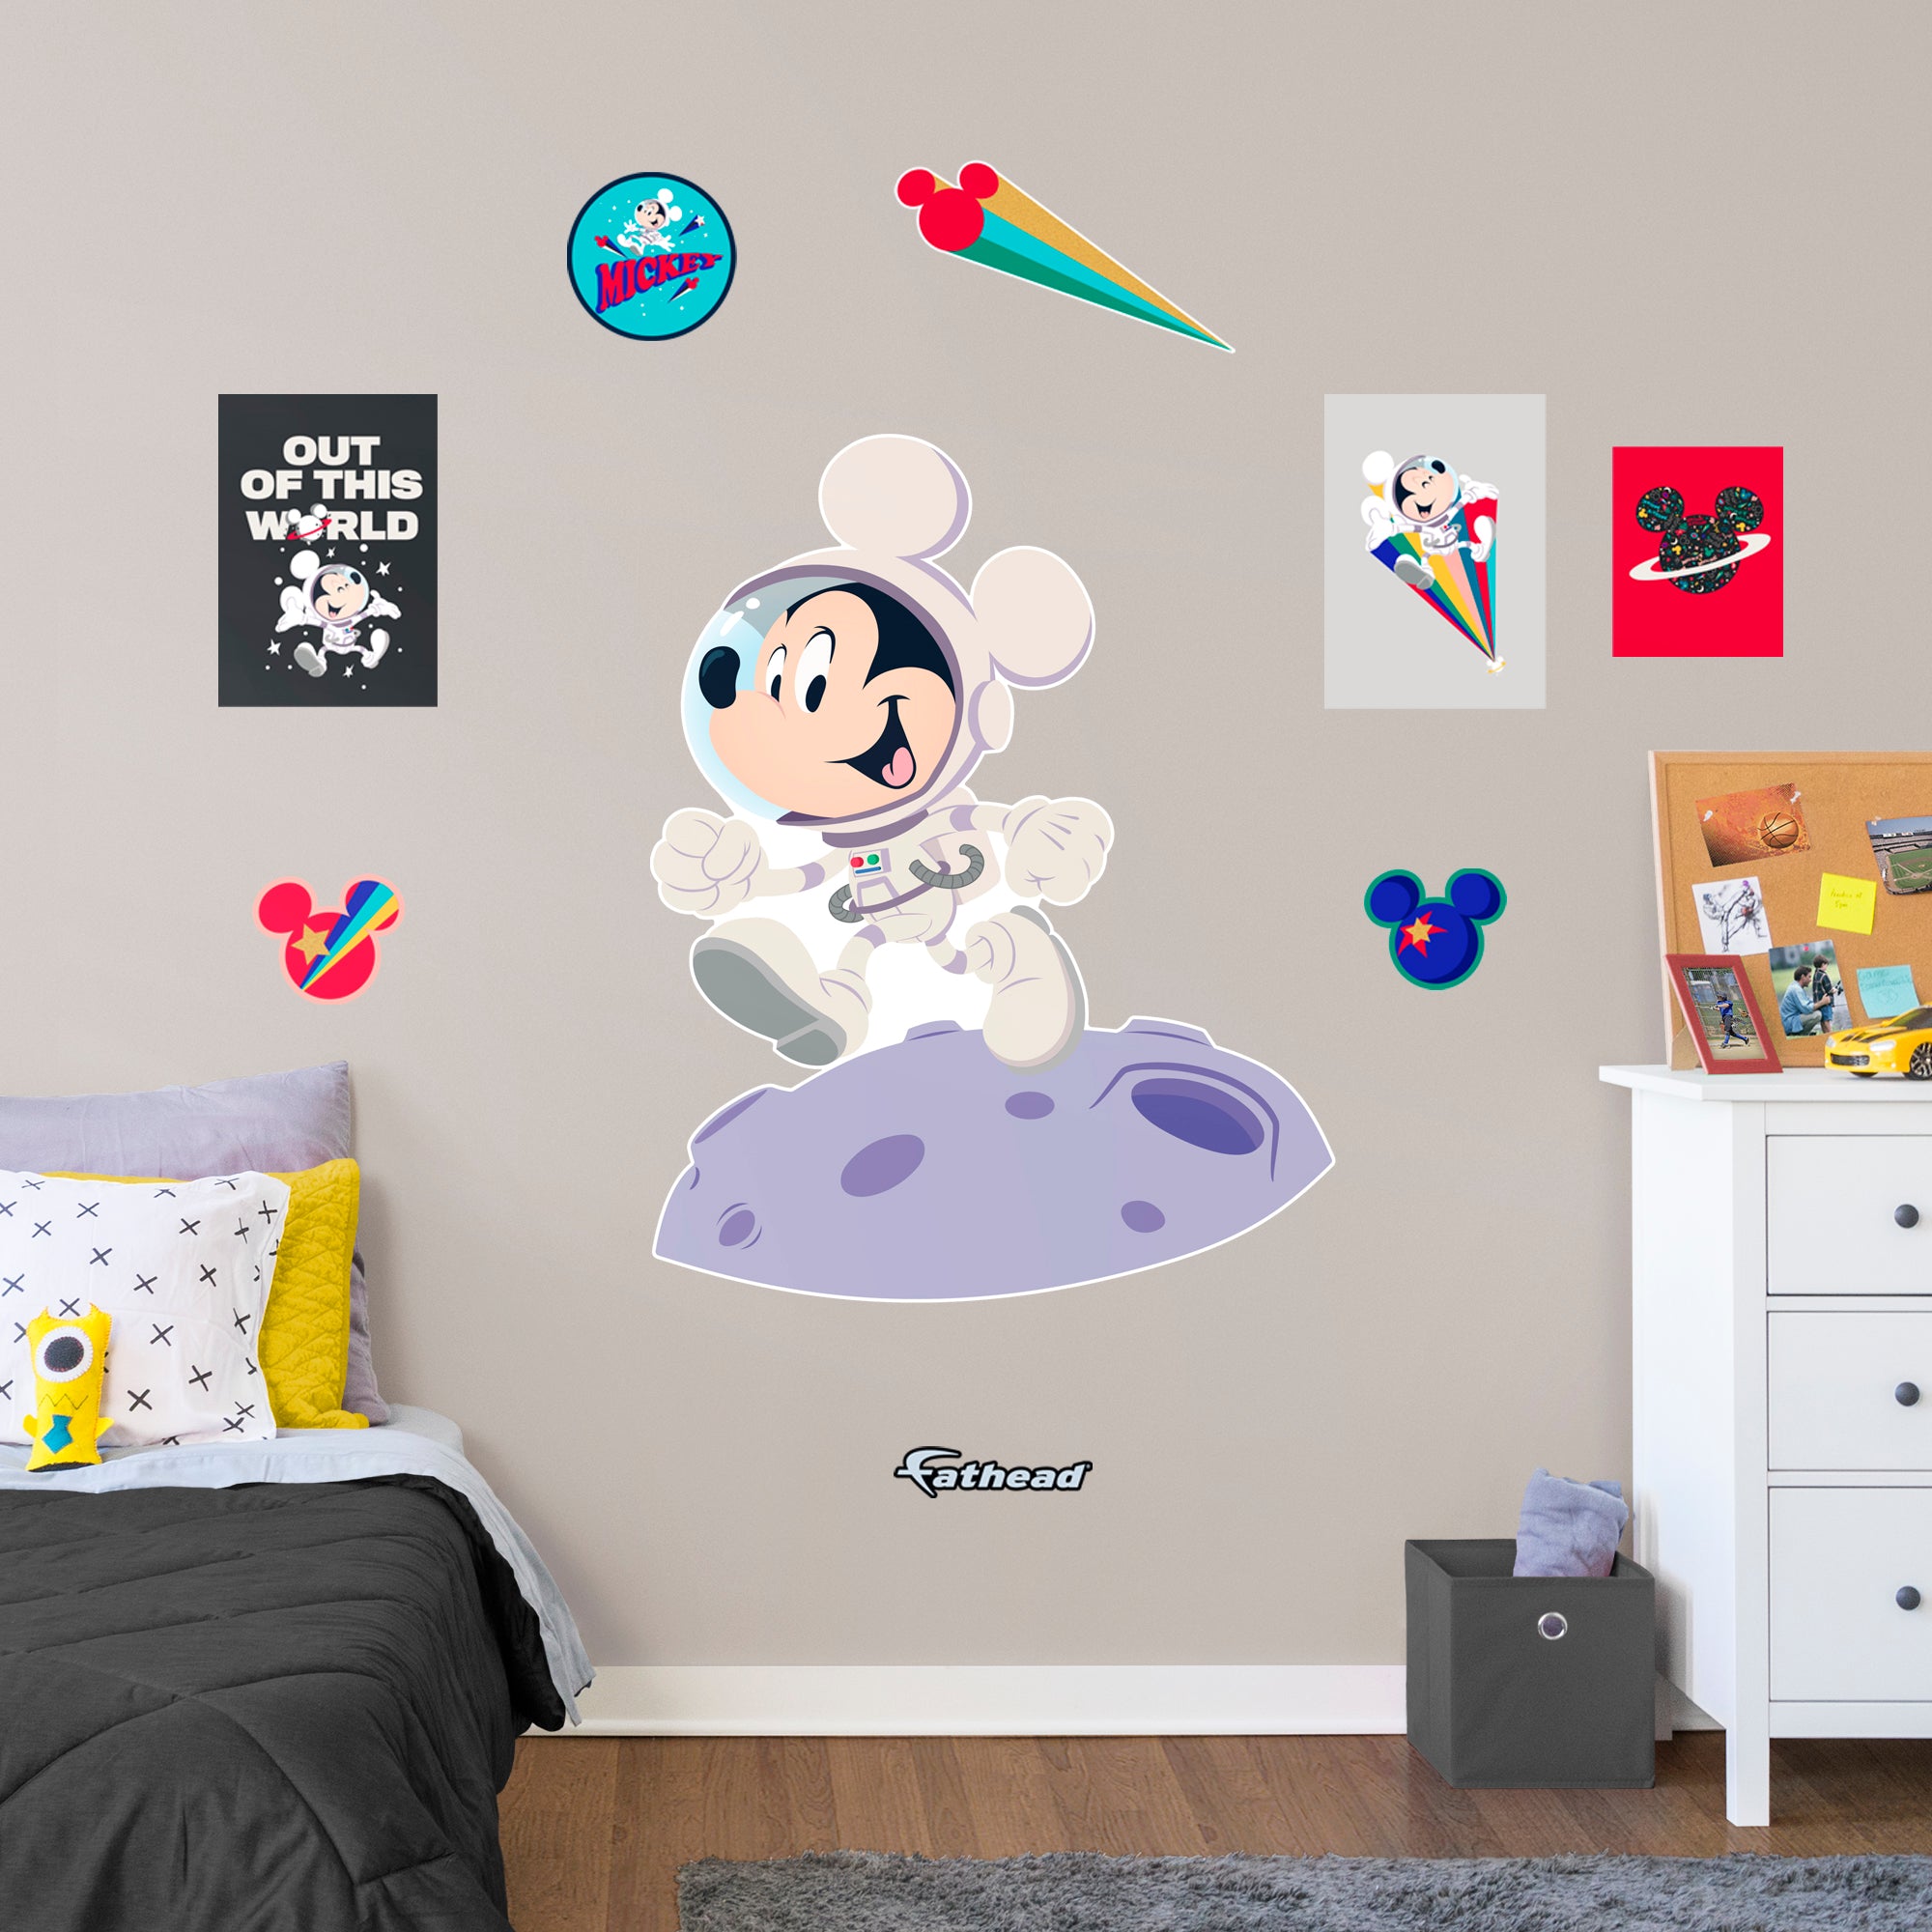 Mickey Mouse on the Moon - Officially Licensed Disney Removable Wall Decal Giant Character + 9 Decals (38"W x 49"H) by Fathead |